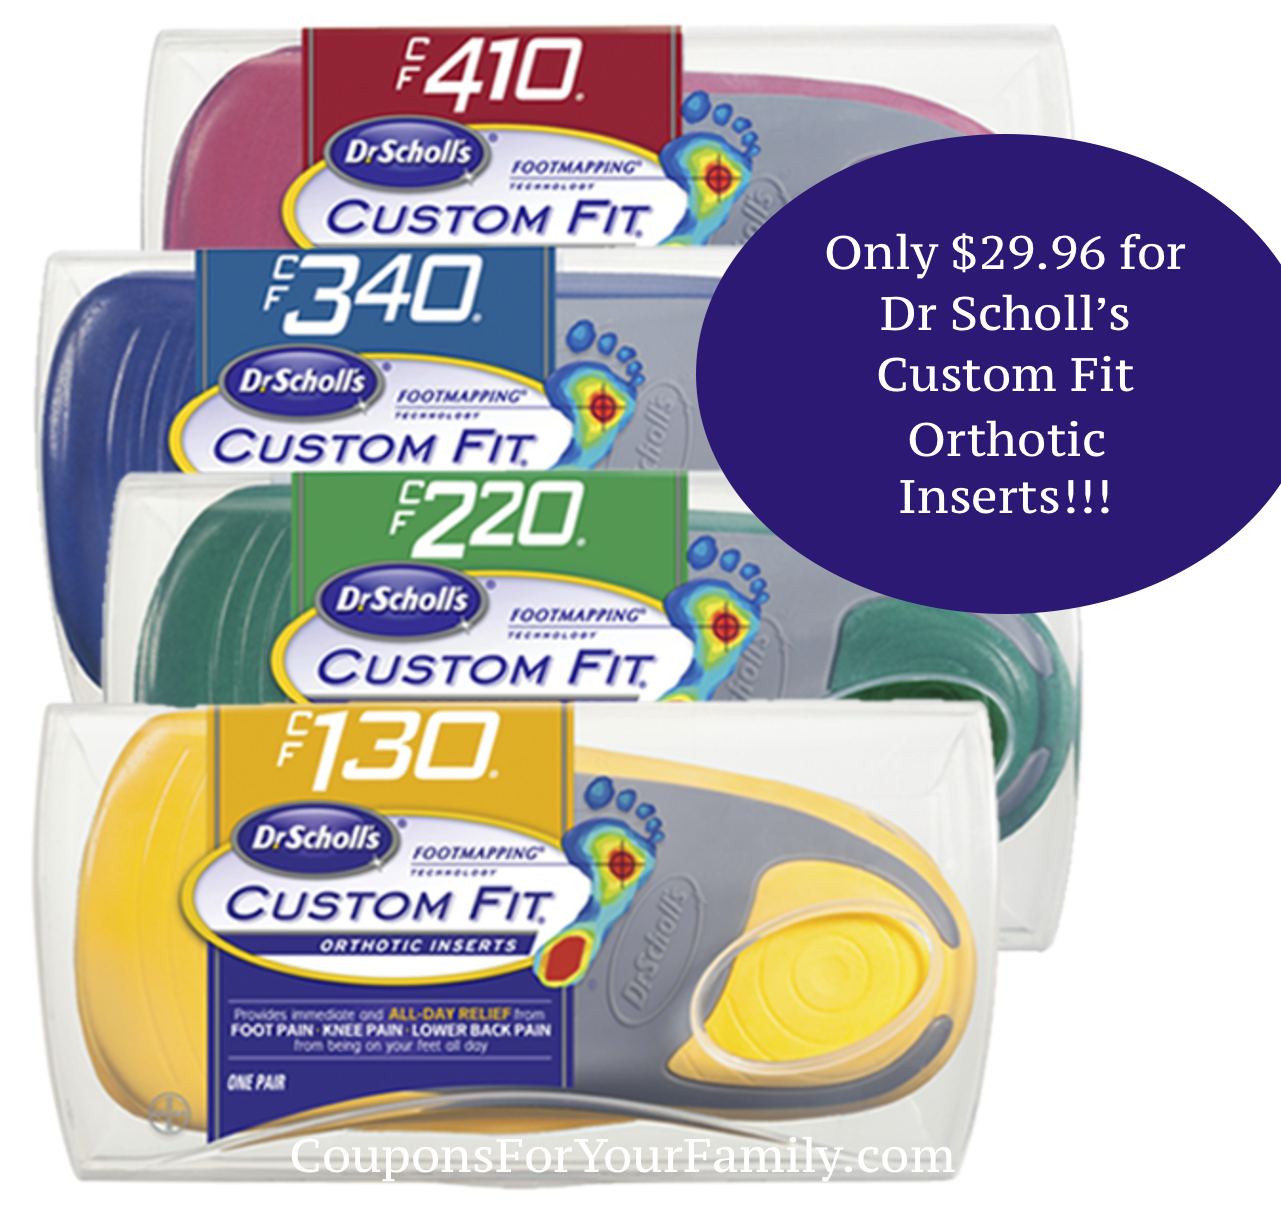 get-dr-scholls-custom-fit-foot-inserts-for-only-29-96-reg-49-96-at